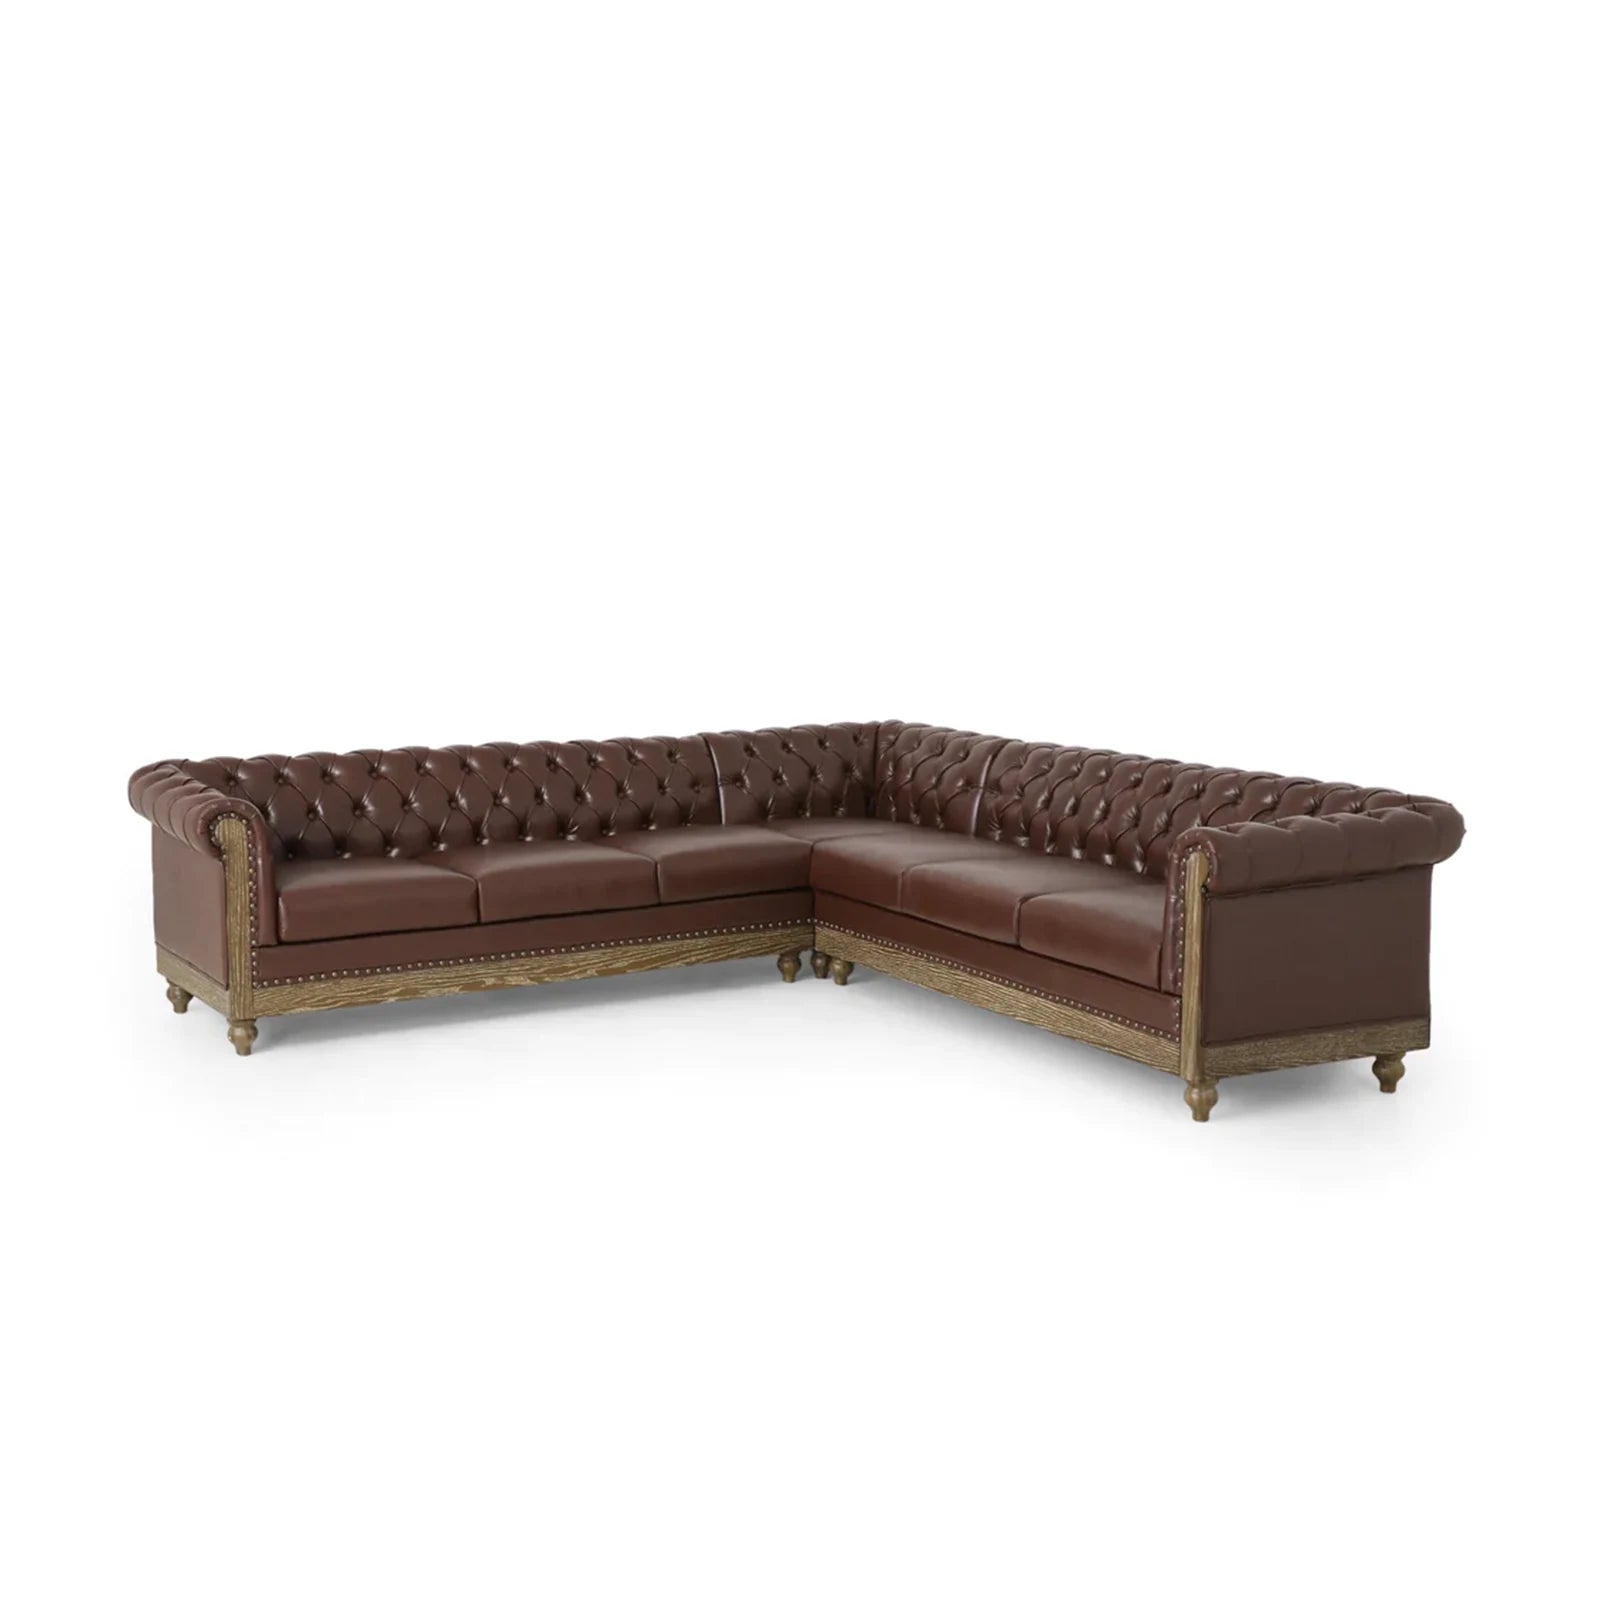 Tufted Sectional Sofa with Nail Head Trim